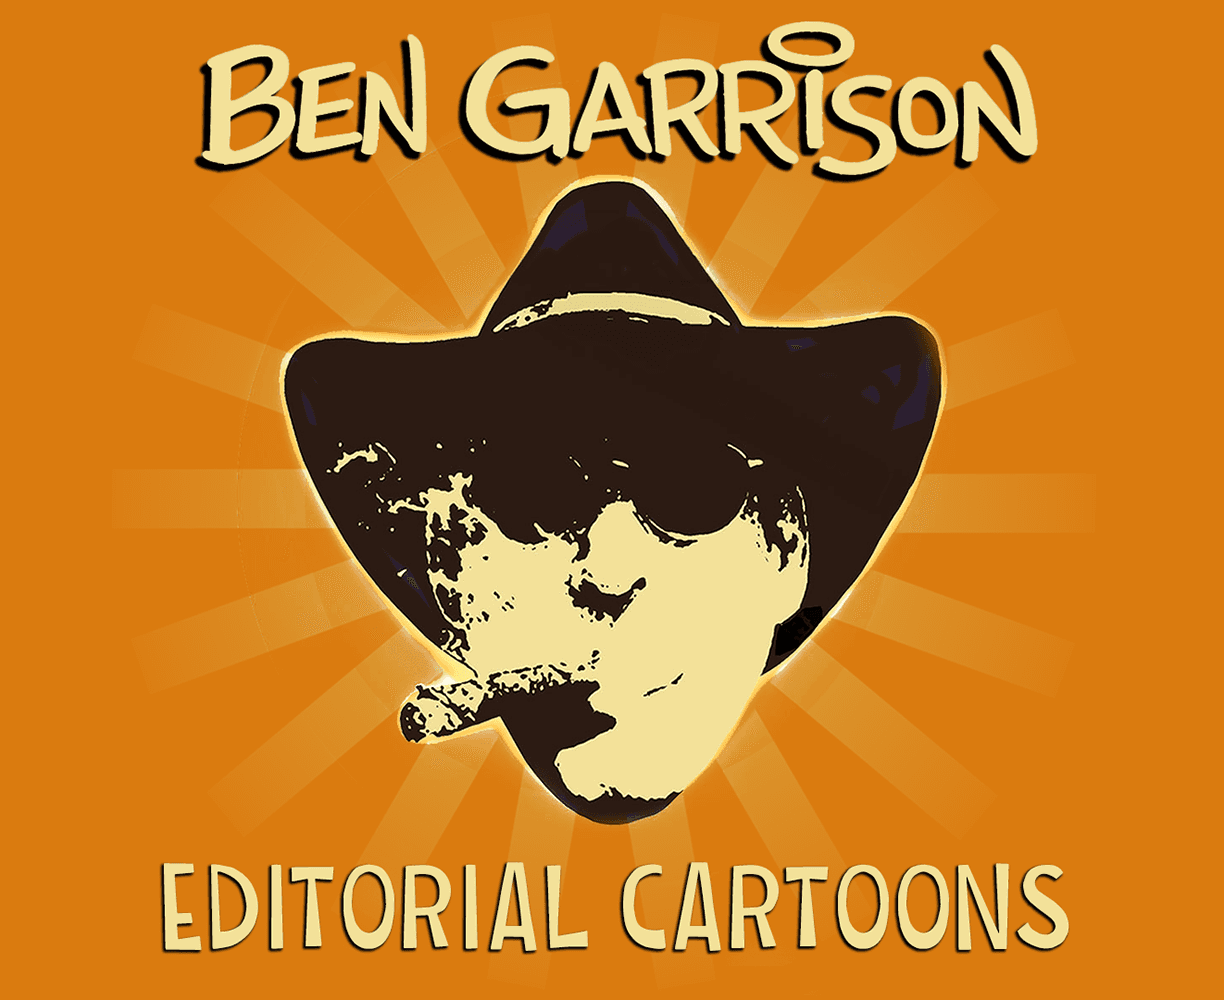 The cover art for the episode Best TDS Oscar from the comics series Ben Garrison, which is number 144 in the series